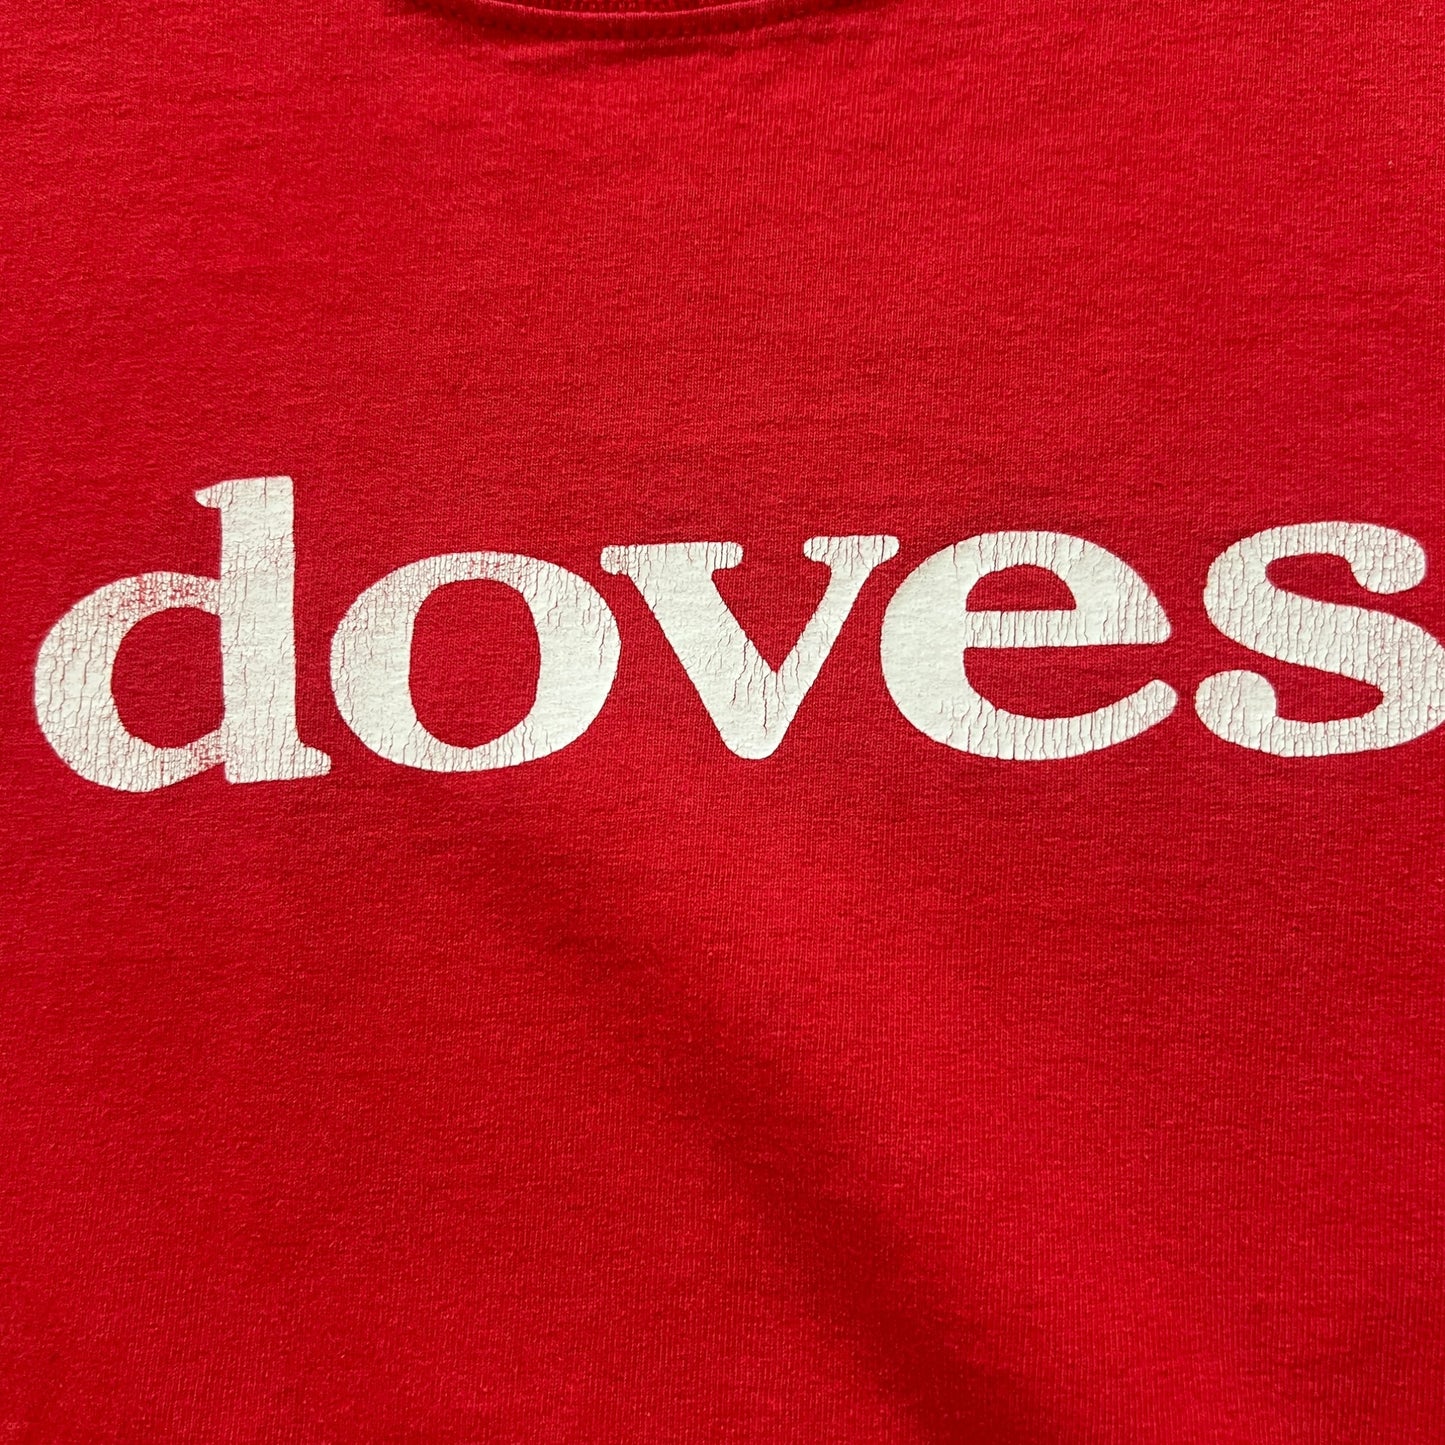 Doves Band Summer 2001 Tour Vintage T-Shirt Size S Red